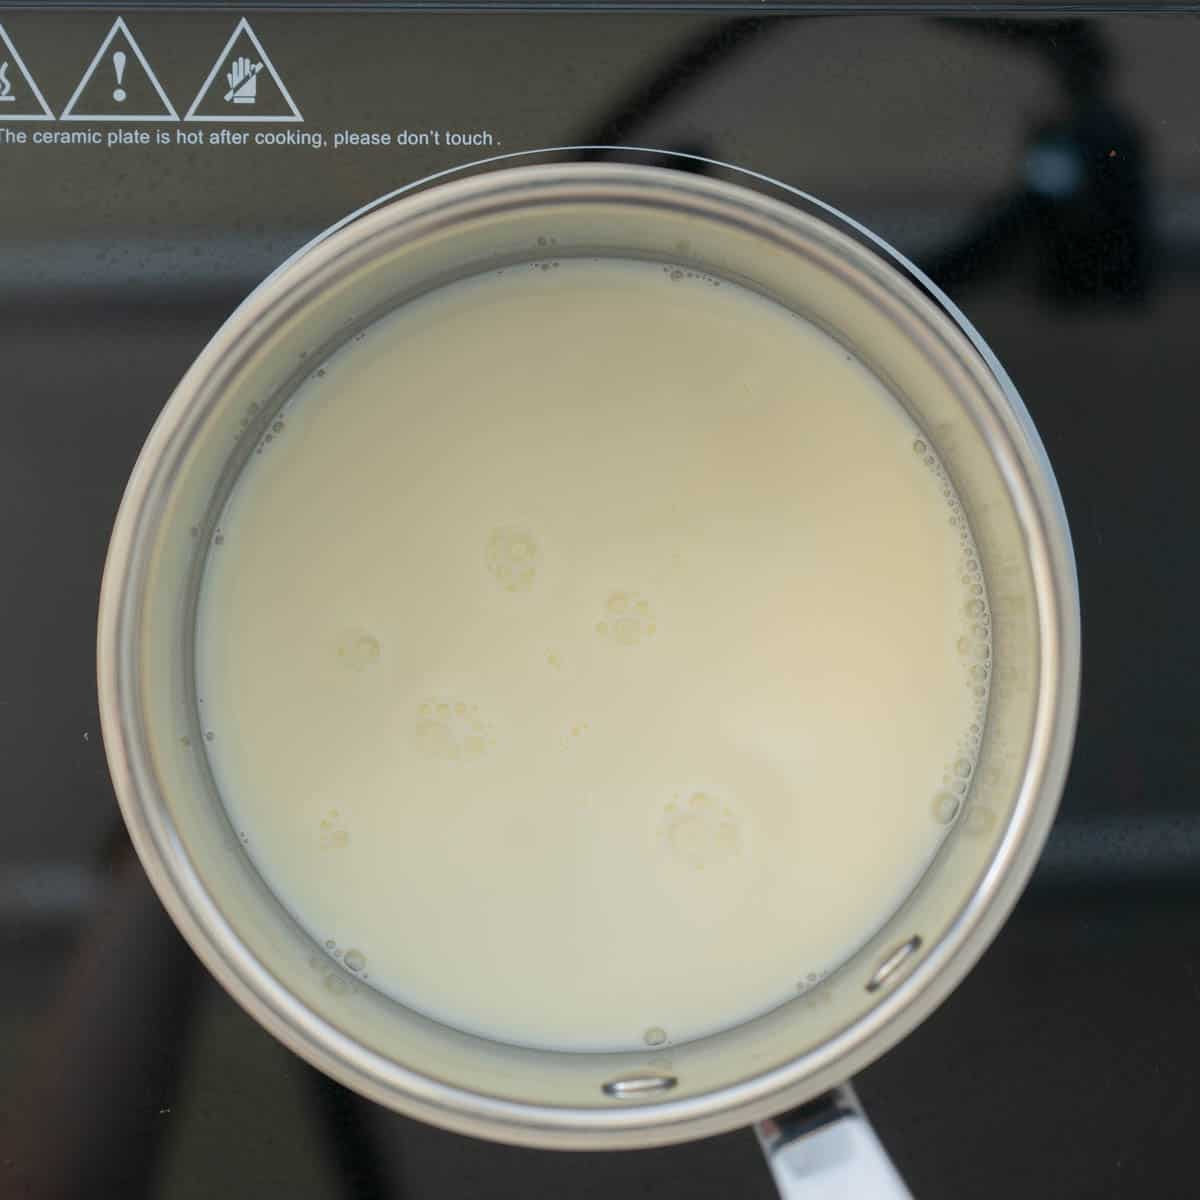 A saucepan of milk heating on a stove top.